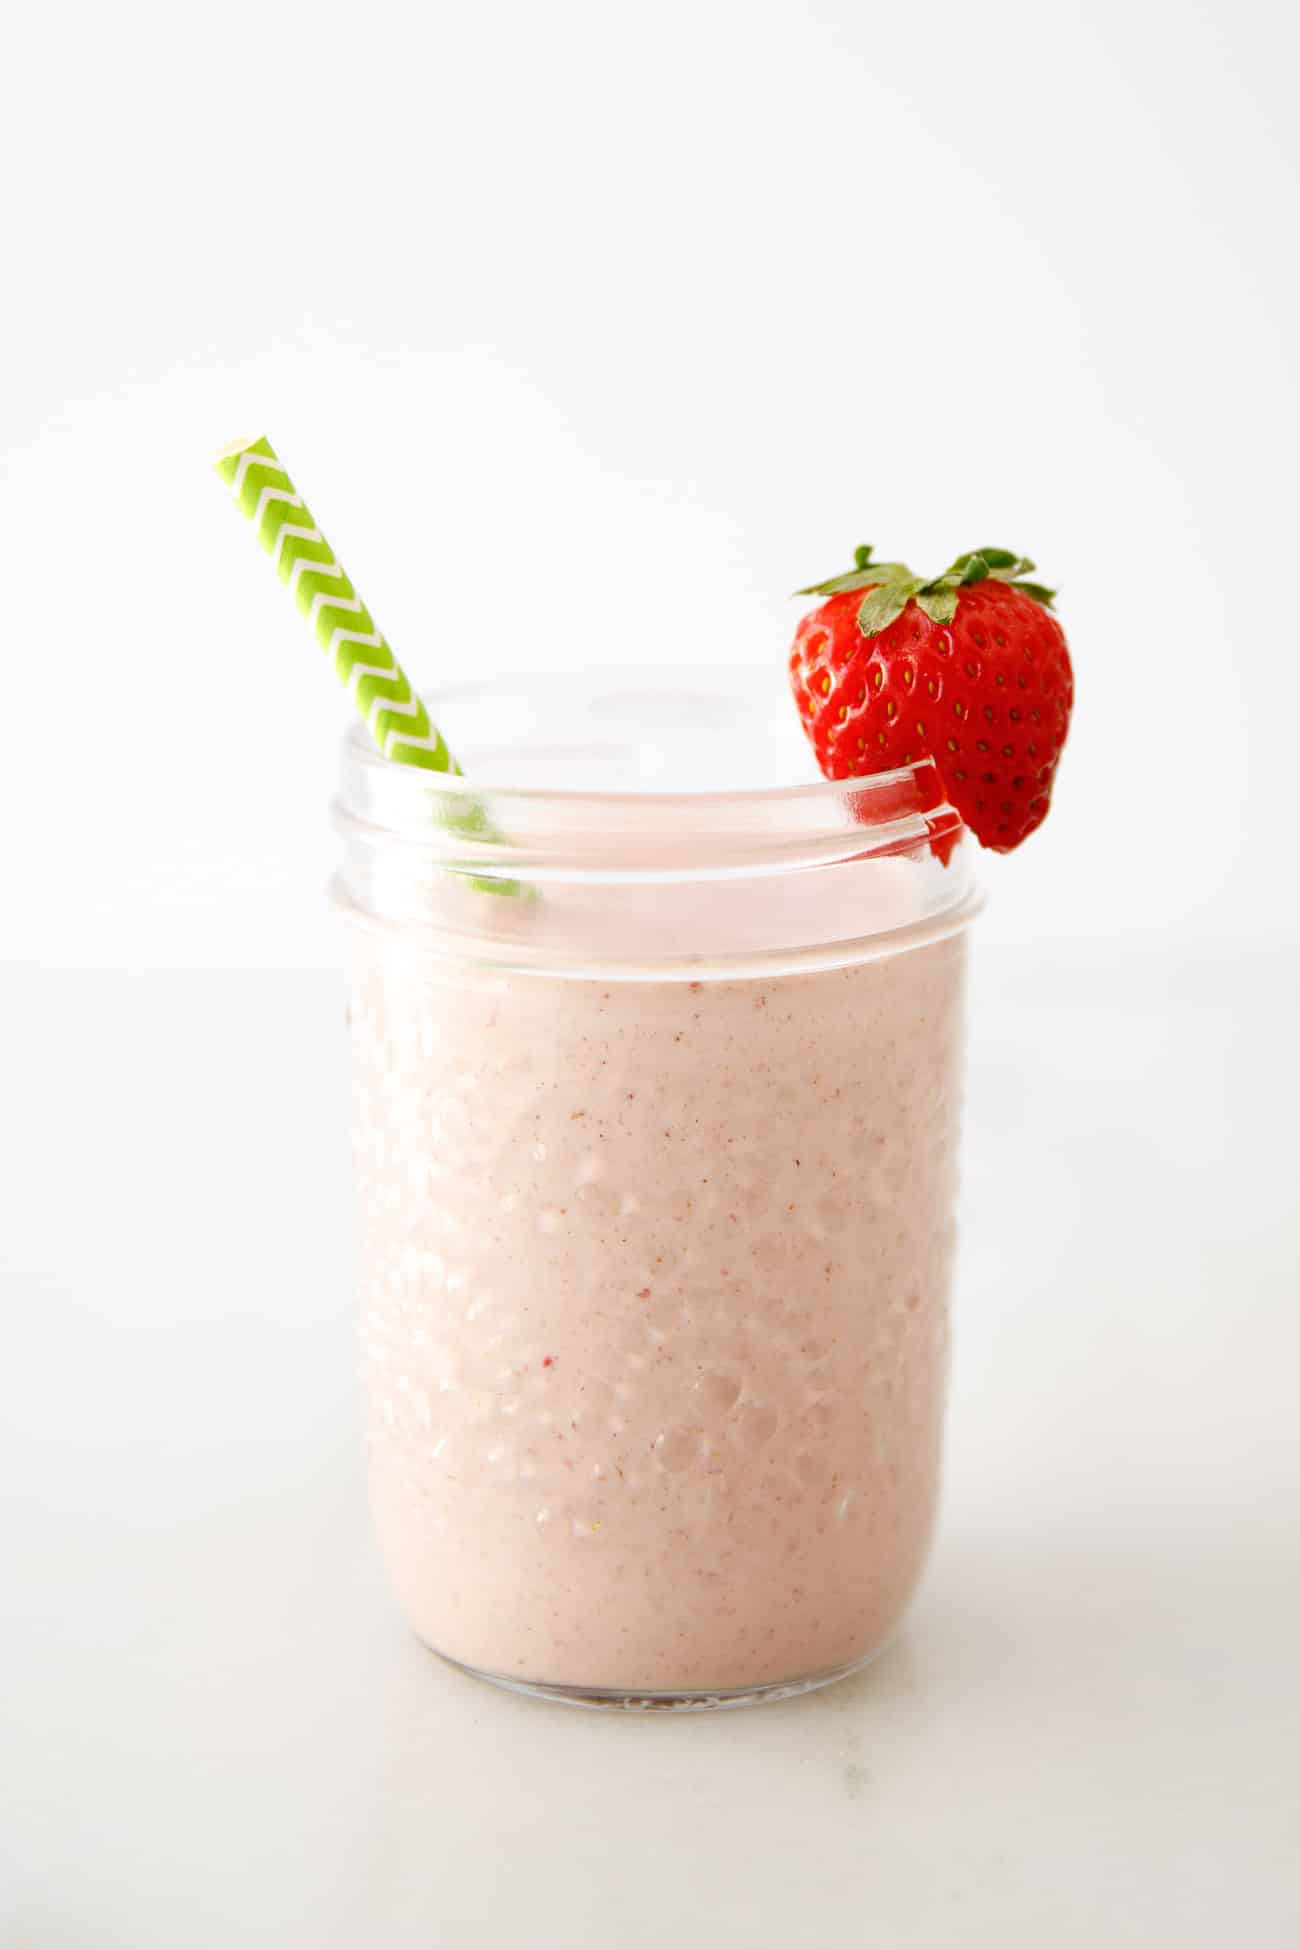 Healthy Smoothie Recipes For Kids
 Healthy Breakfast Smoothies for Kids